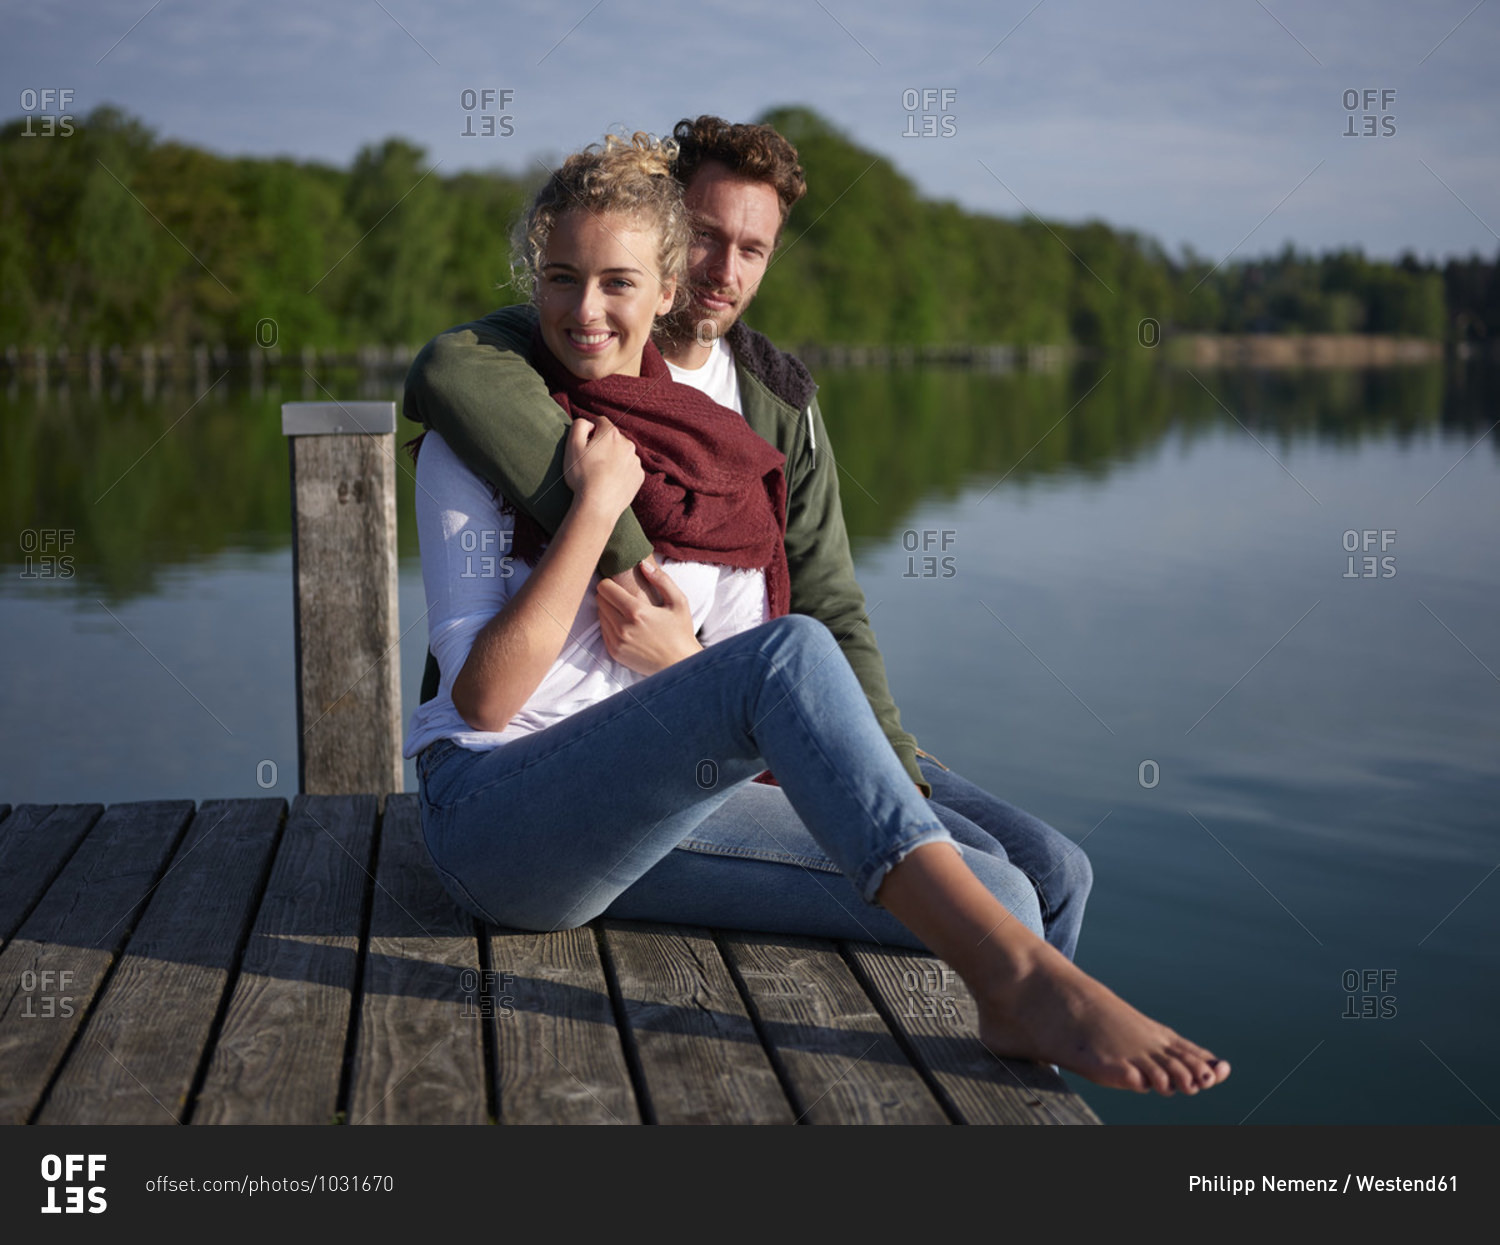 Romantic couple sitting on jetty at the lake